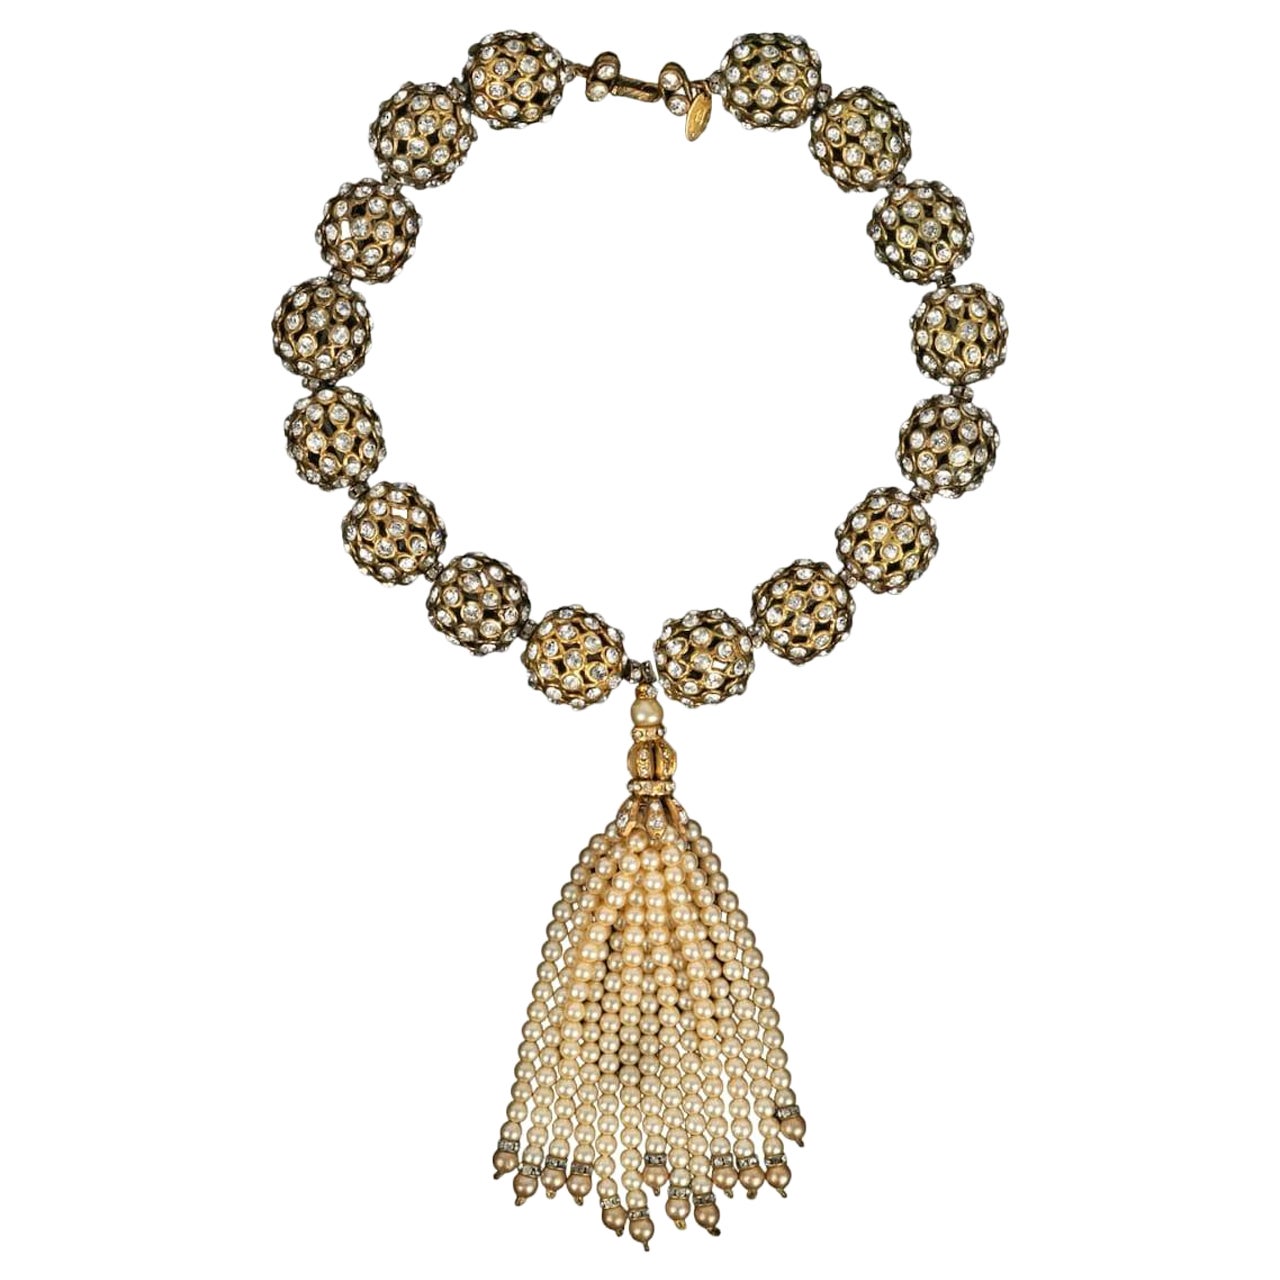 Chanel Short Necklace in Gold Metal Beads Paved with Rhinestones For Sale